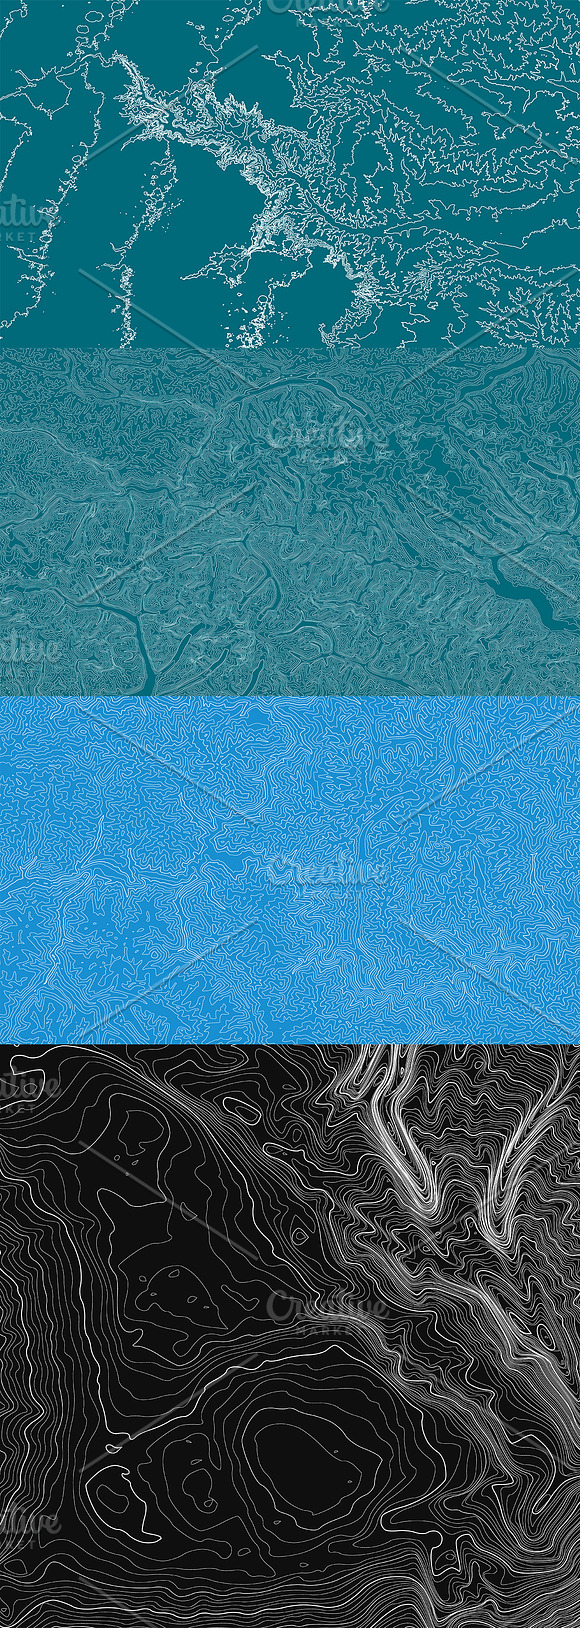 20 Abstract Earth Relief Maps in Textures - product preview 2